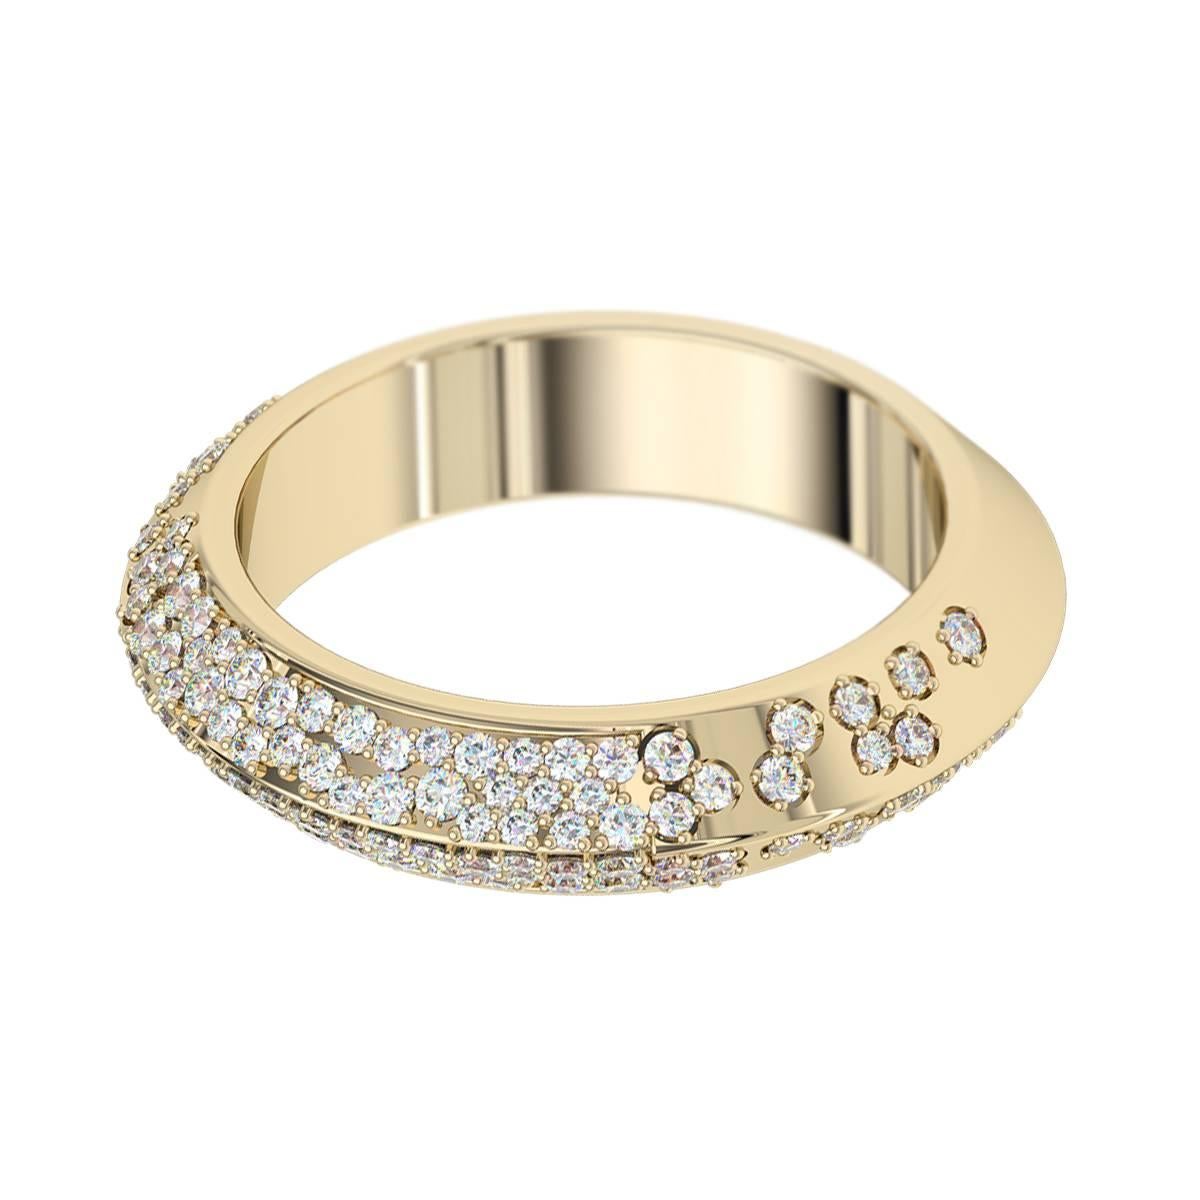 This elegant diamond pave eternity ring is handcrafted in Sydney in 18 karat yellow gold, and set with  .8ct of top quality diamonds. The knife edge design of the band is timeless and contemporary. This beautiful ring would make a superb wedding